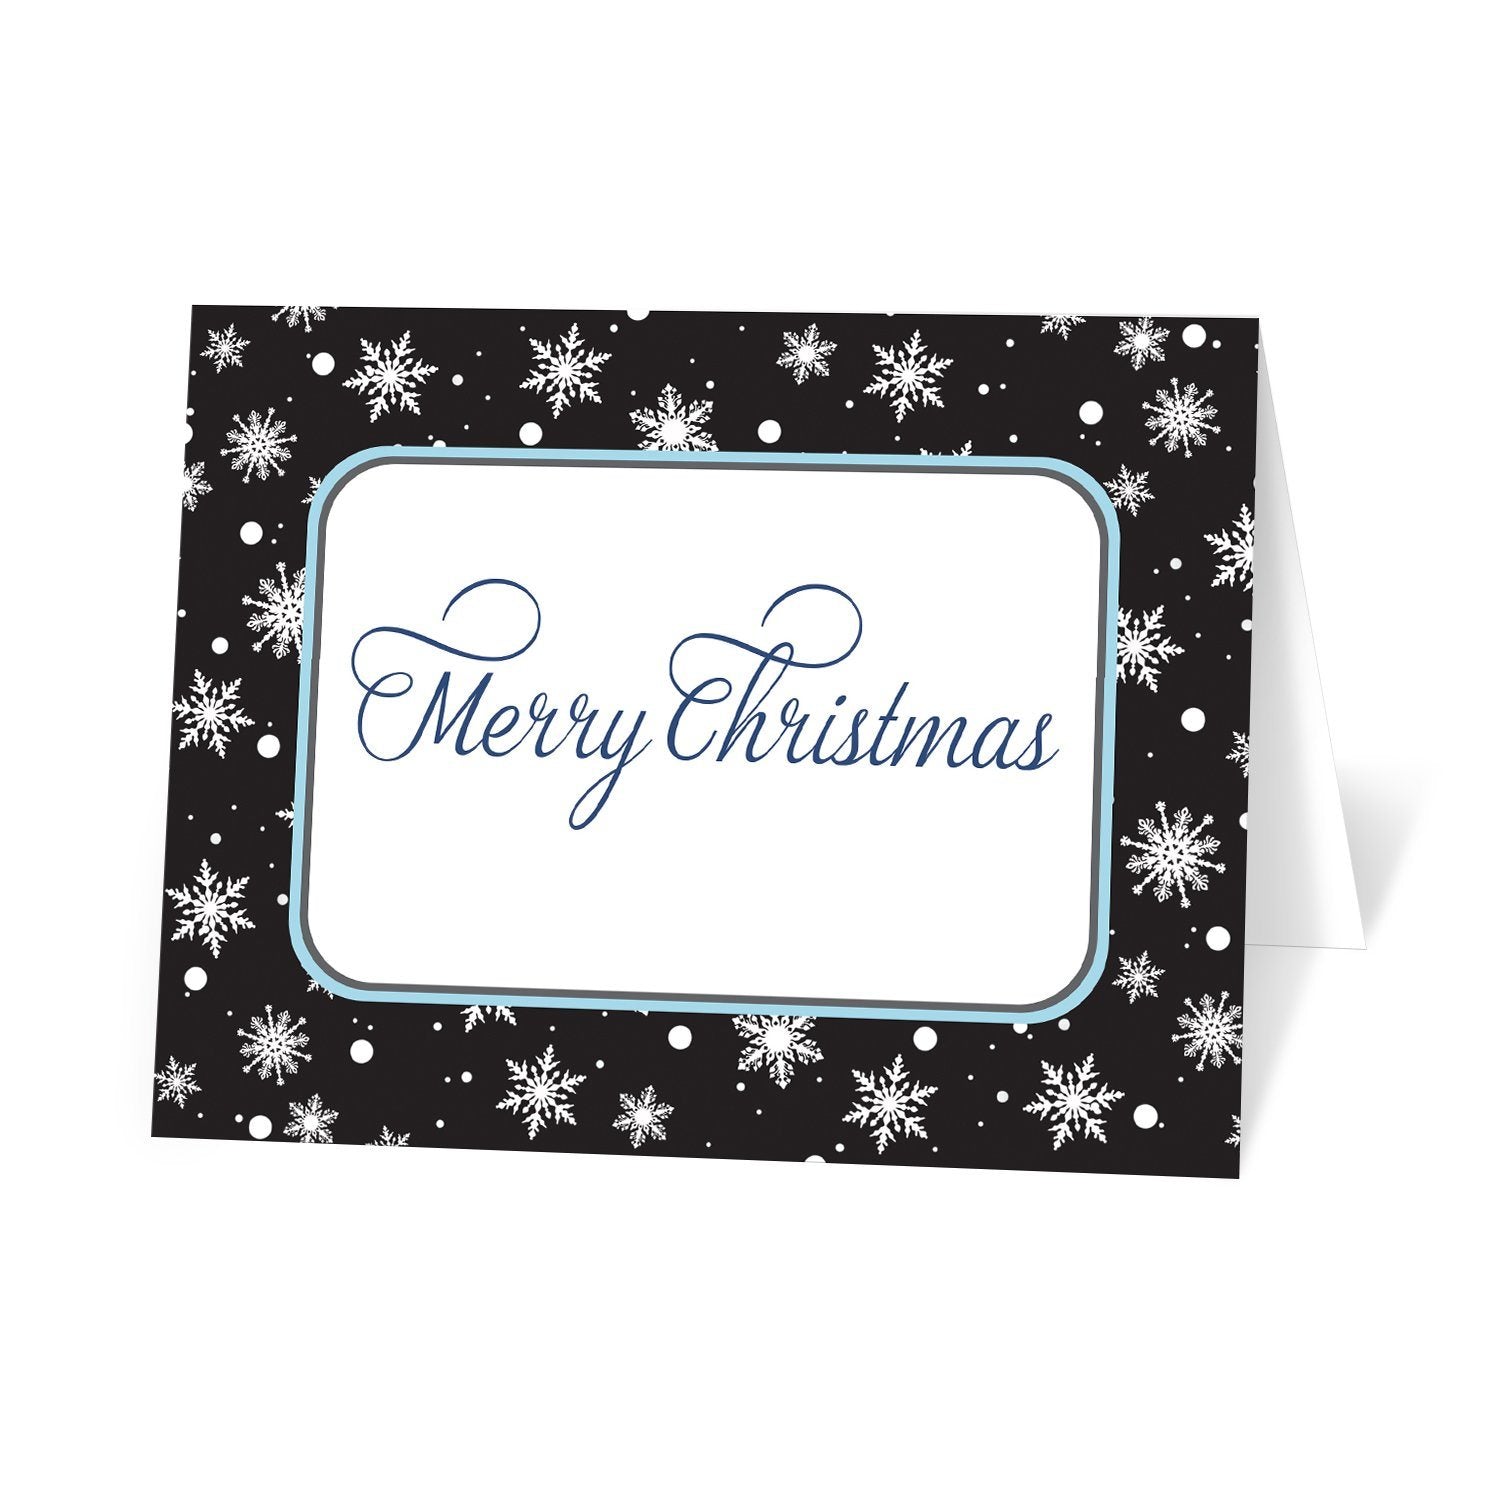 Midnight Snowflake Winter Christmas Cards at Artistically Invited